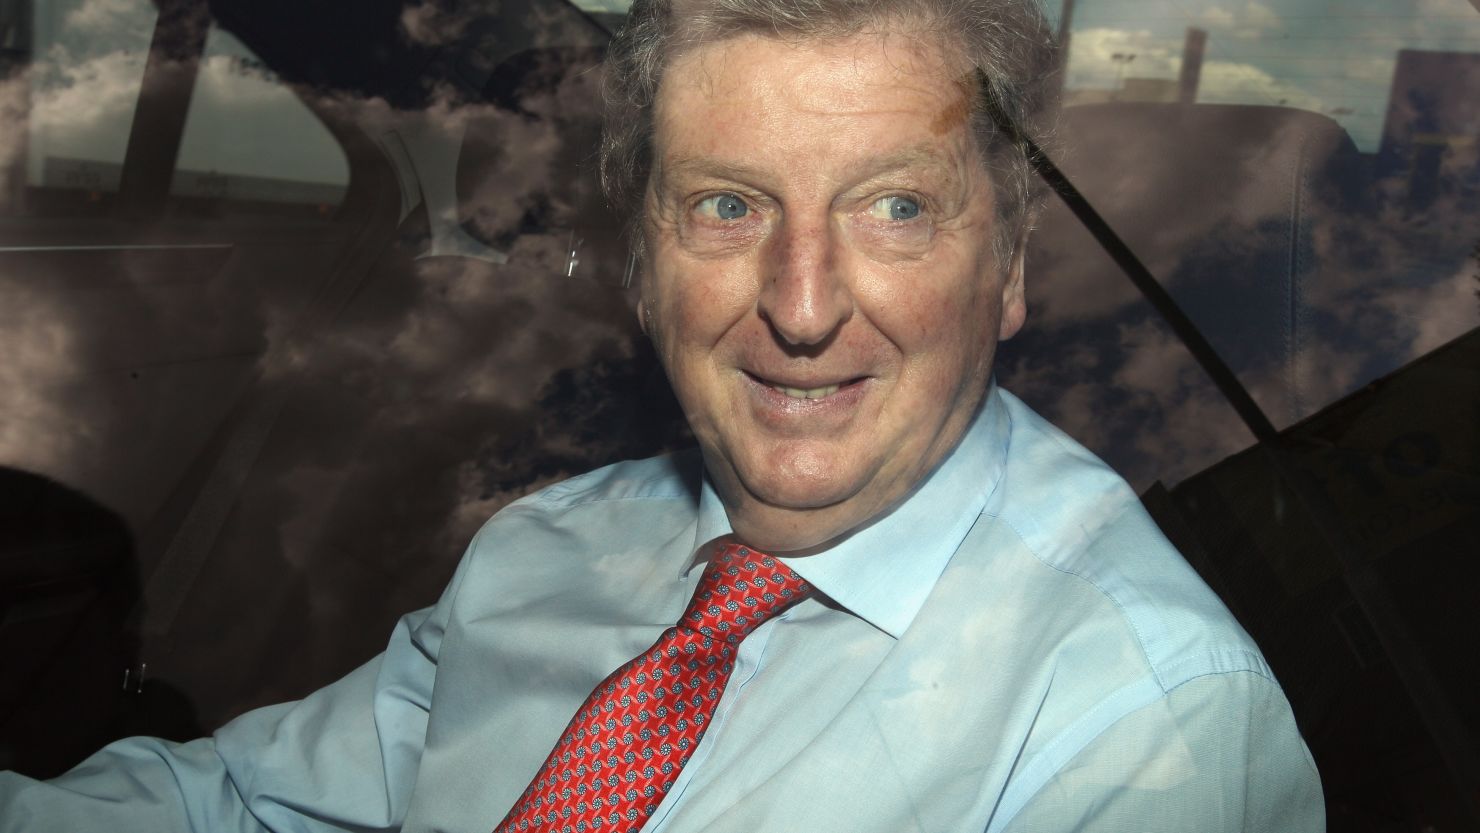 West Brom coach Roy Hodgson arrives at Wembley for talks about the vacant England job